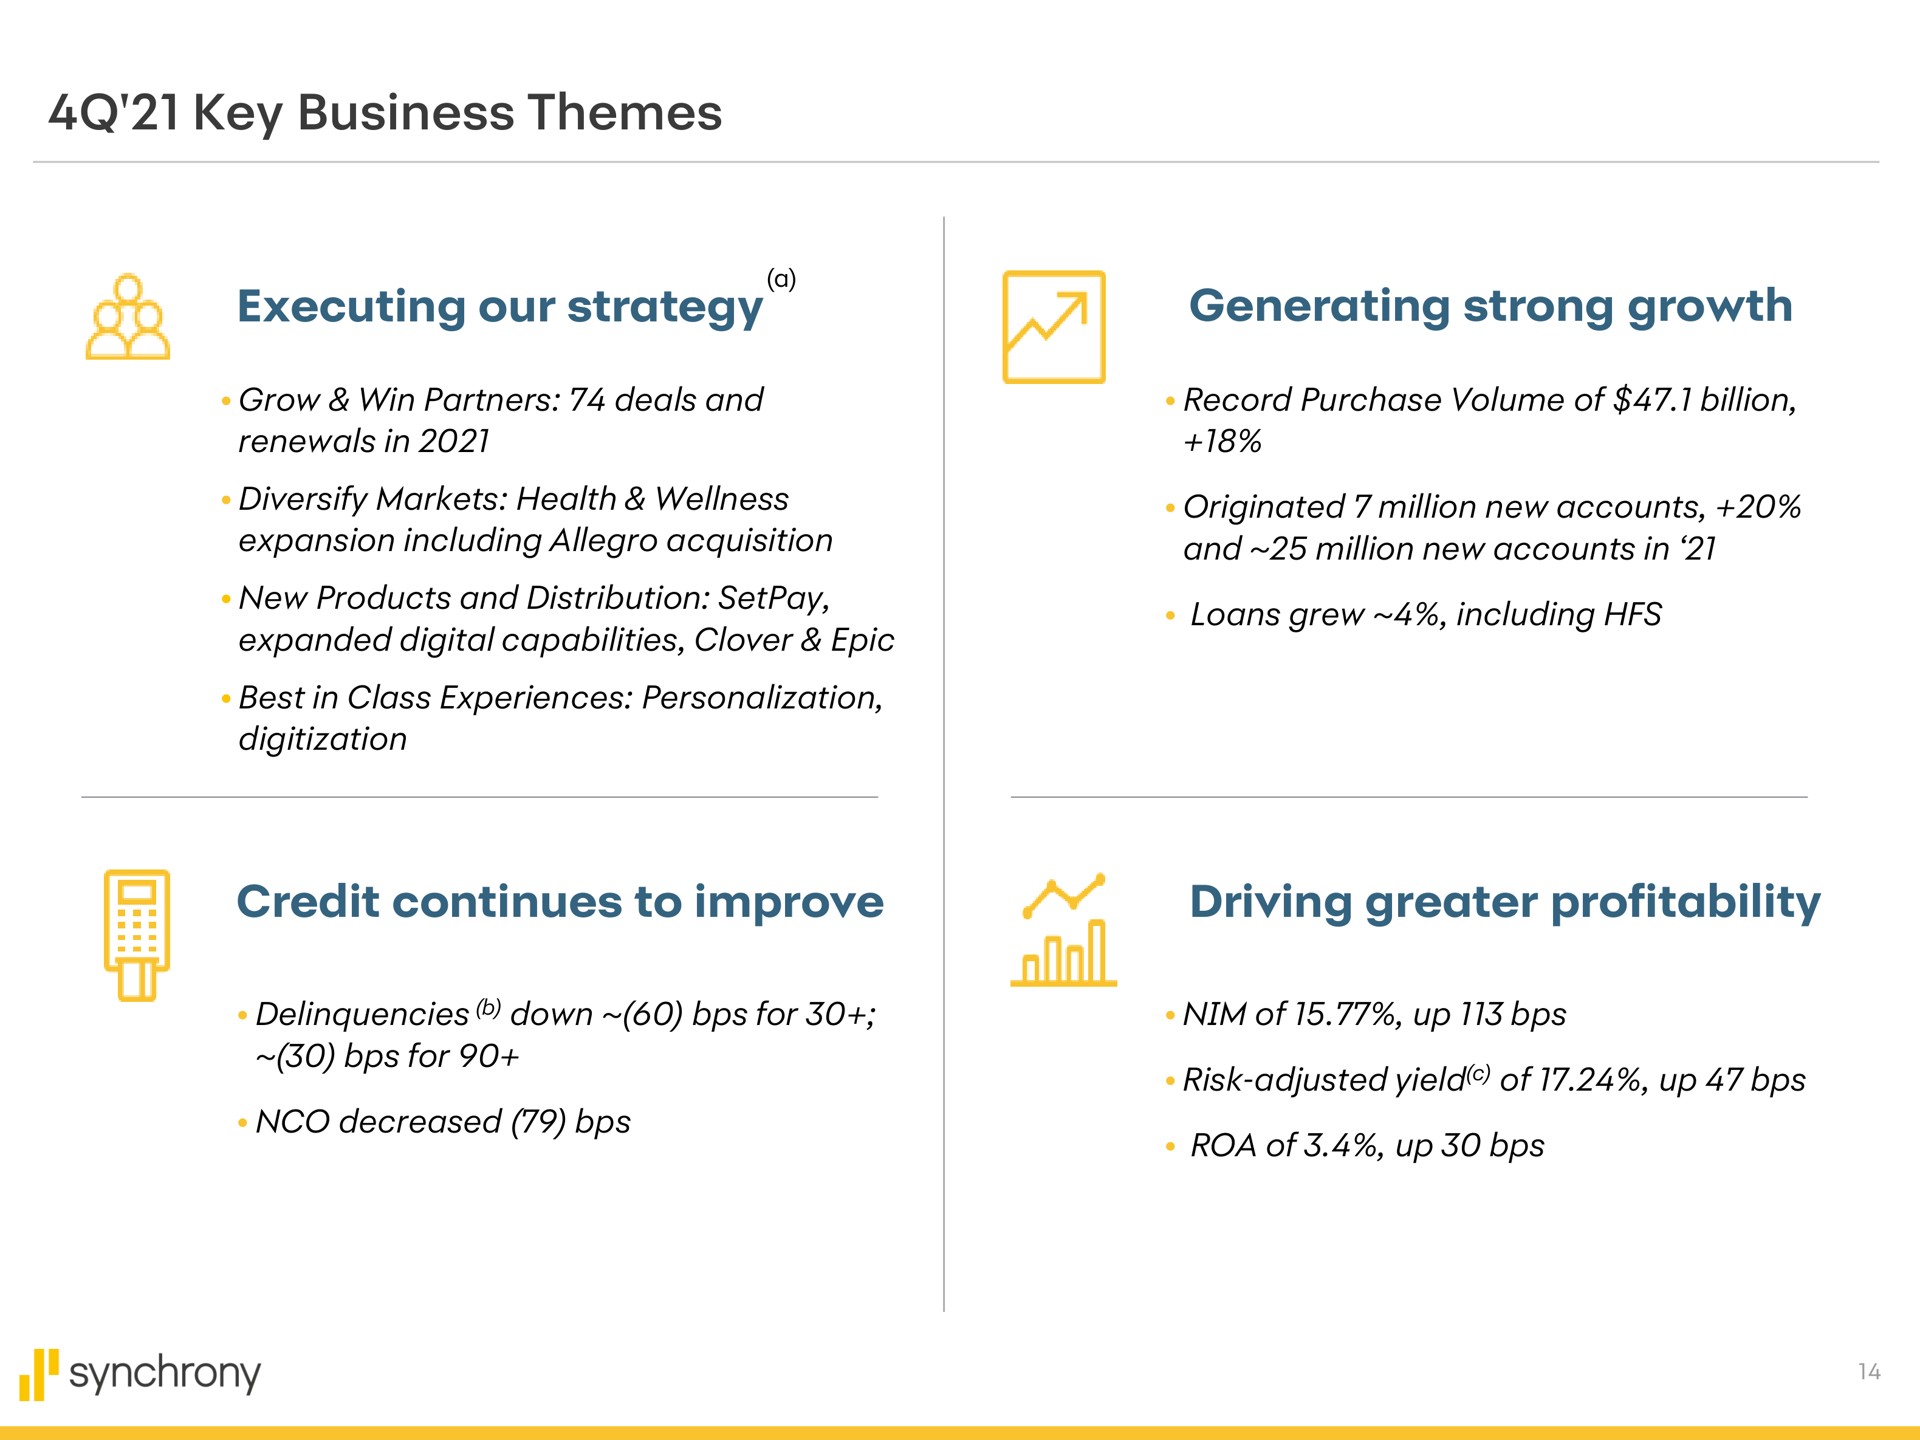 key business themes executing our strategy generating strong growth credit continues to improve driving greater profitability a delinquencies down for risk adjusted yield of up synchrony | Synchrony Financial